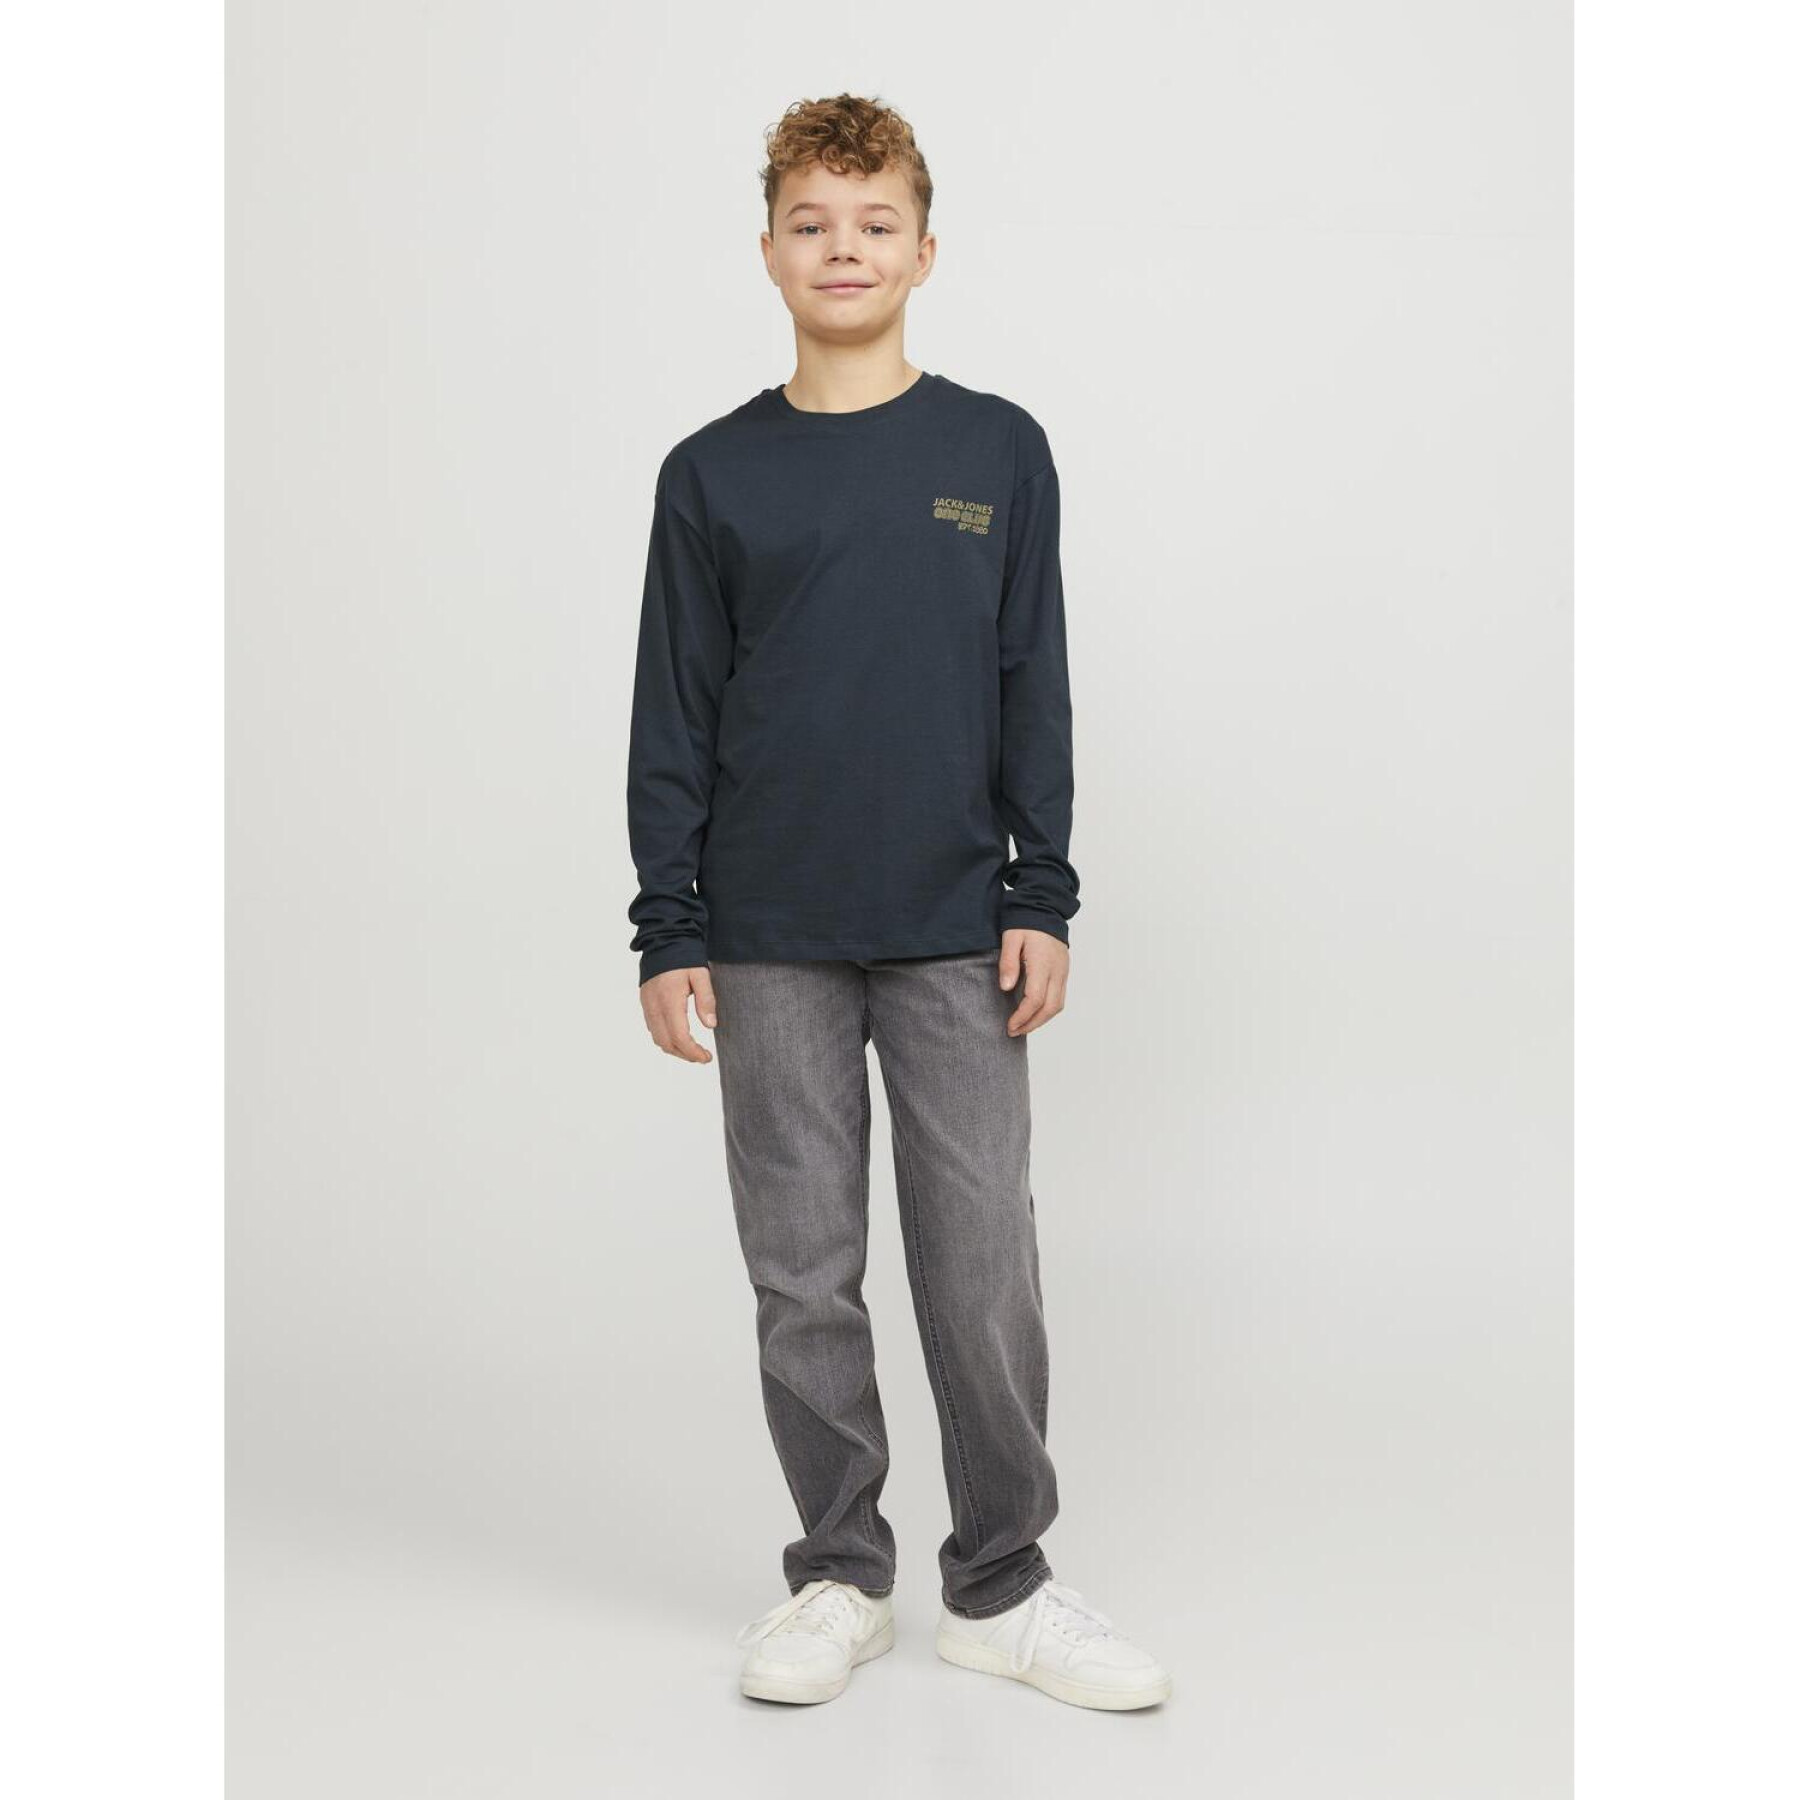 Children's loose-fitting long-sleeved T-shirt Jack & Jones Collect EDT